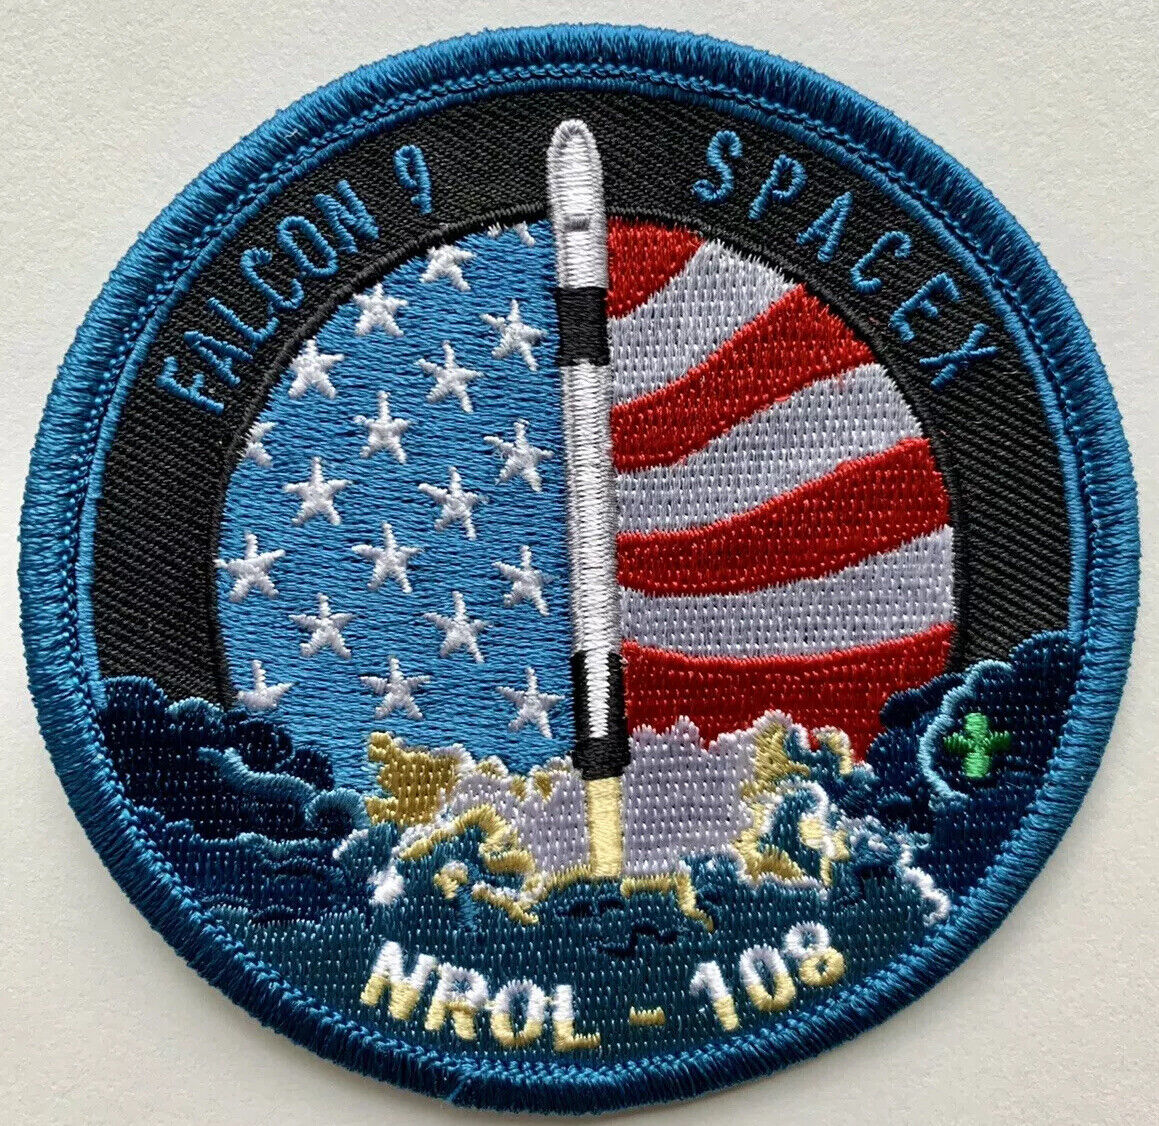 Original SpaceX Falcon 9 NROL-108 Mission Patch NASA 3.5” Mint Condition